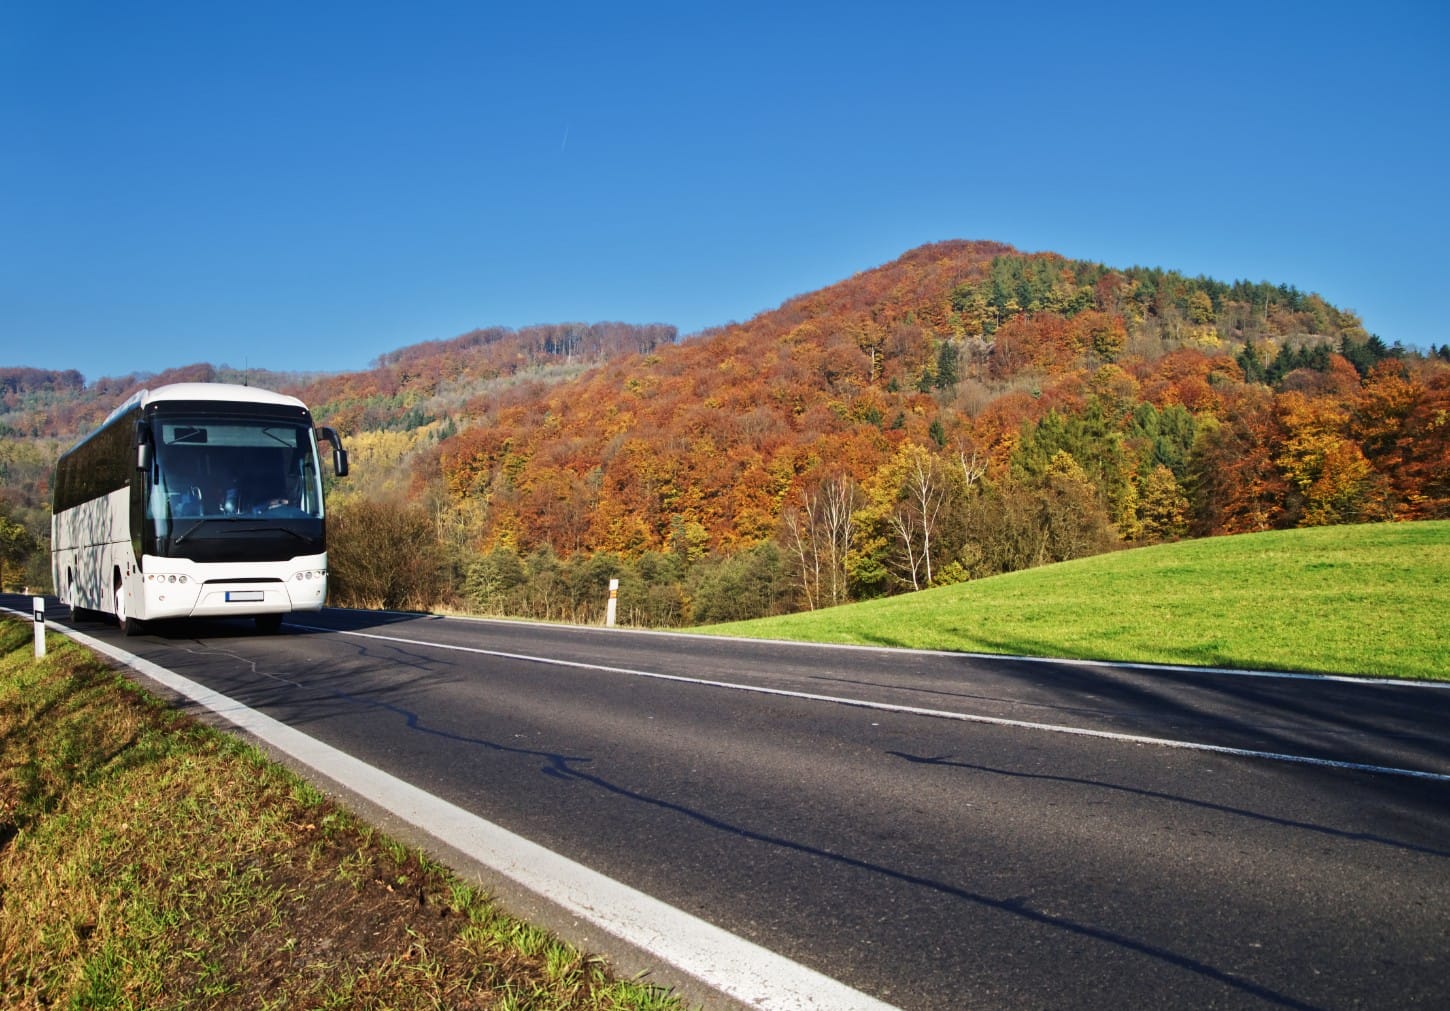 Rent a bus for a day trip